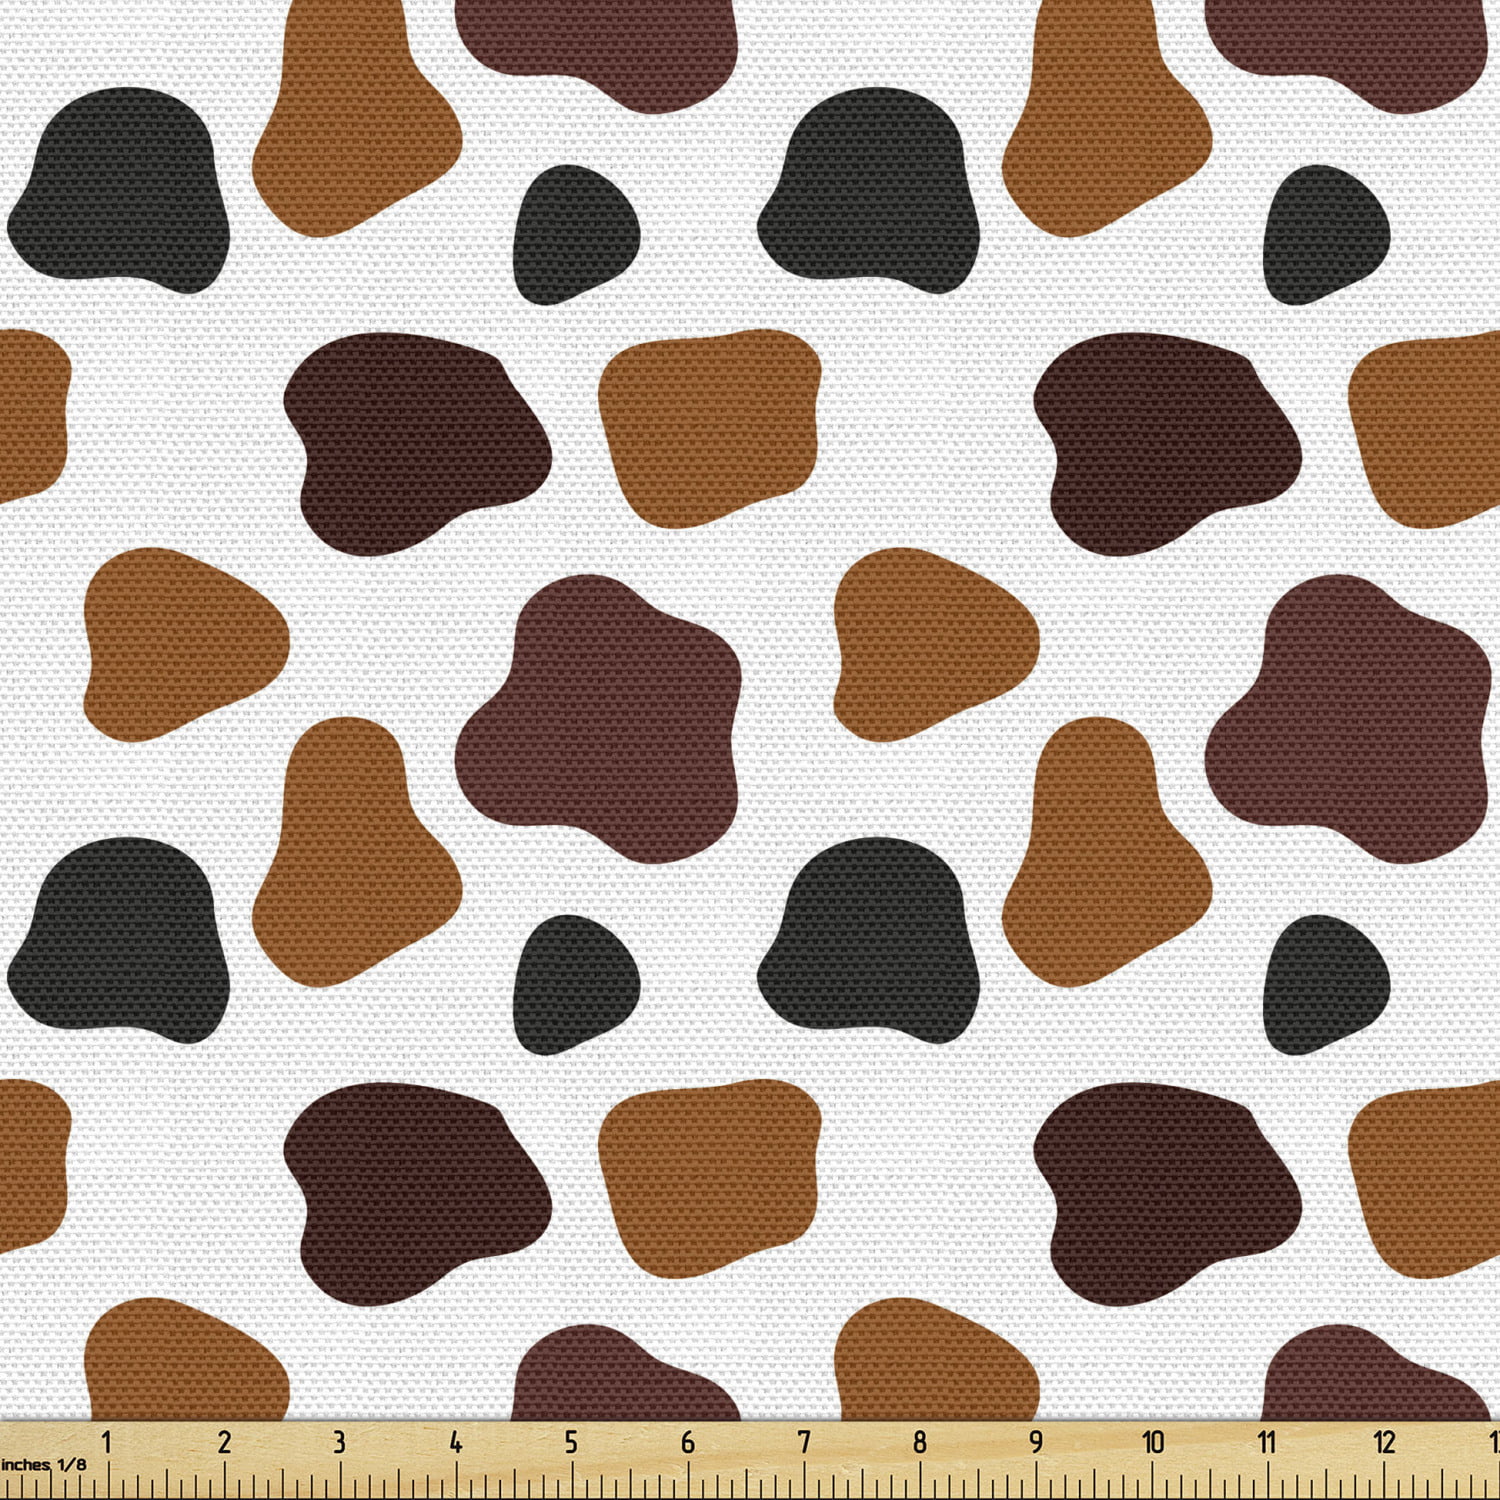 Brown Cow Print Suede Fabric, Hobby Lobby